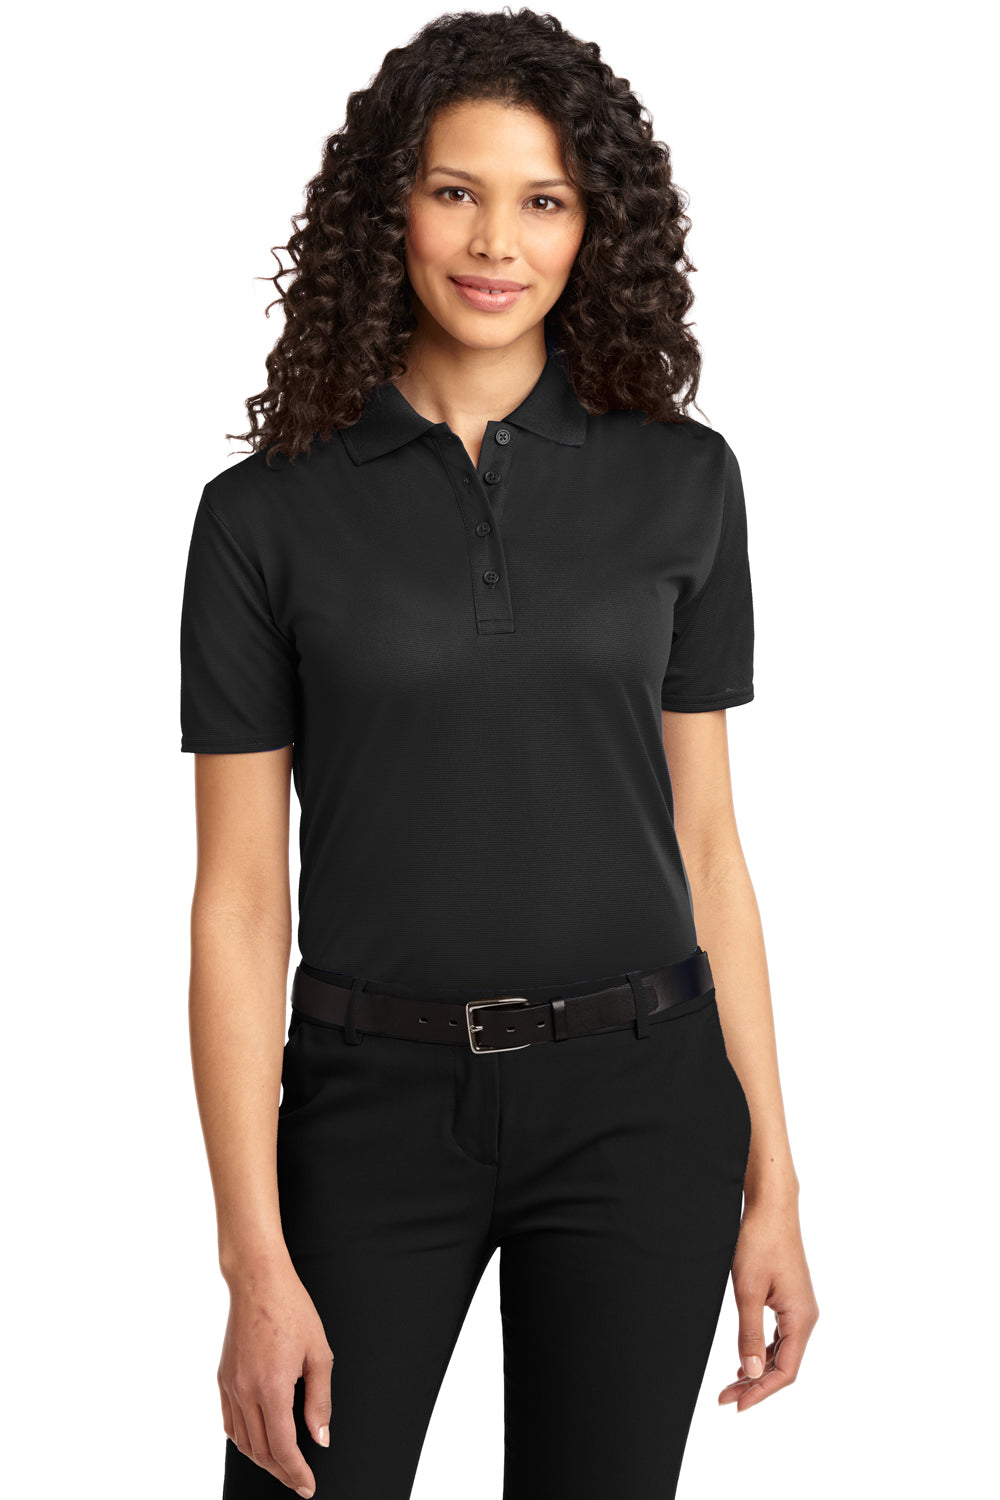 Port Authority L525 Womens Dry Zone Moisture Wicking Short Sleeve Polo Shirt Black Front